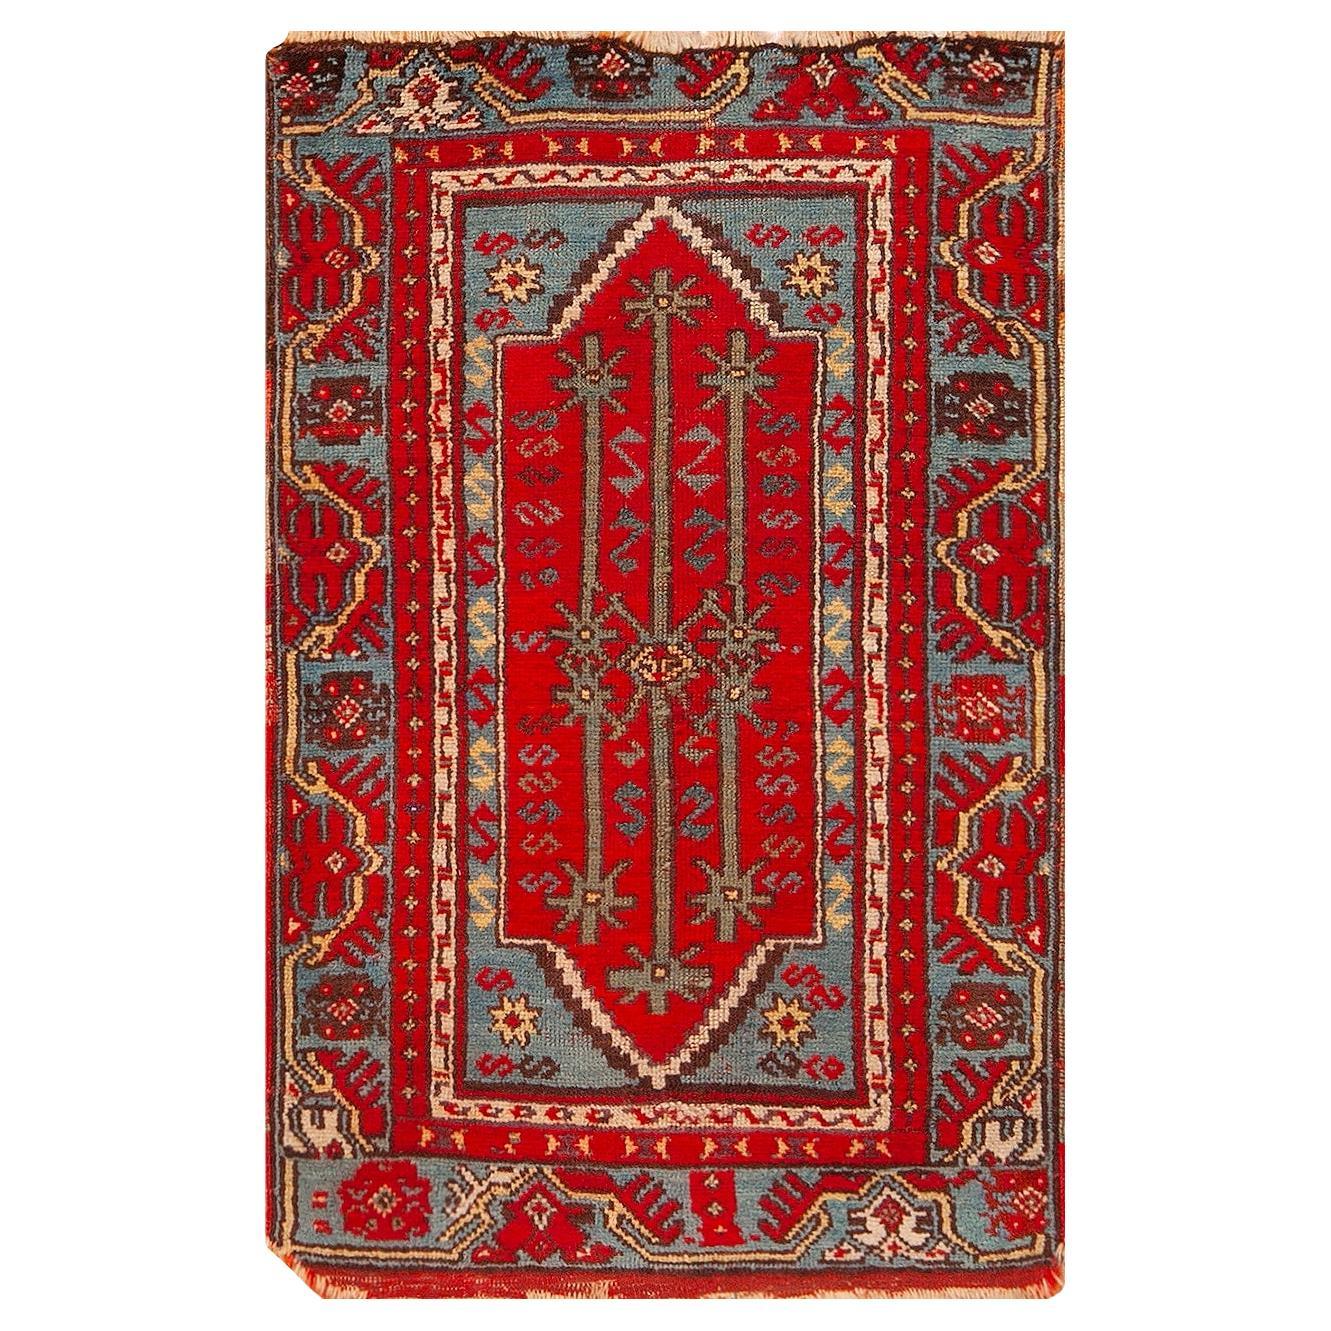 Small Scatter Size Tribal Geometric Antique Turkish Yastic Rug 1'11" x 3' For Sale